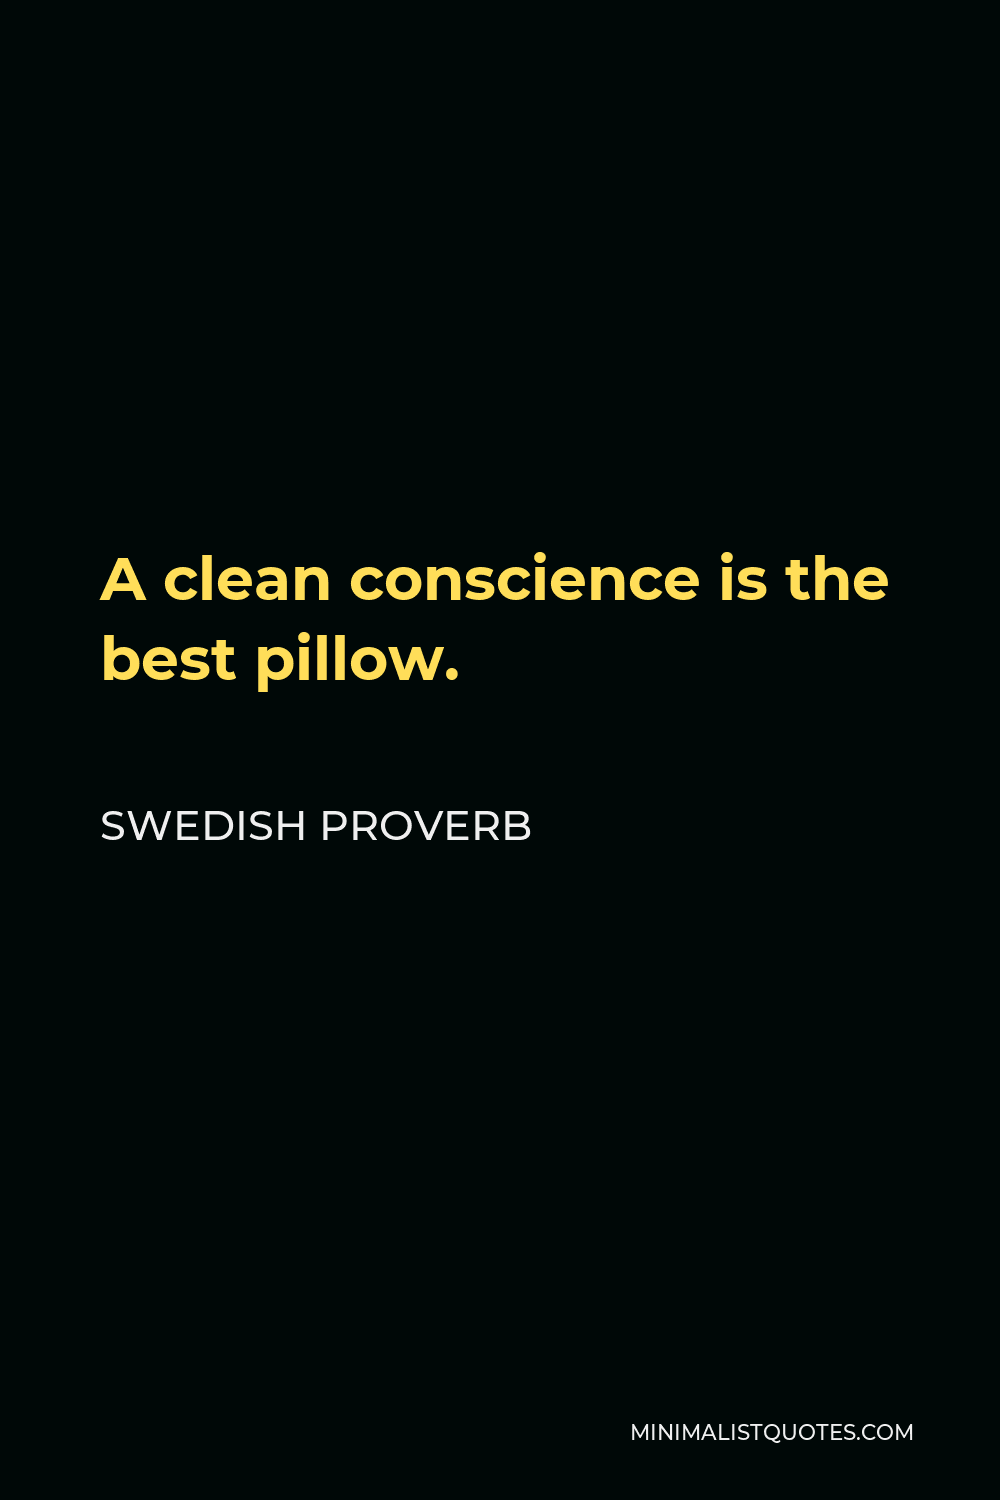 Swedish Proverb Quote - A clean conscience is the best pillow.